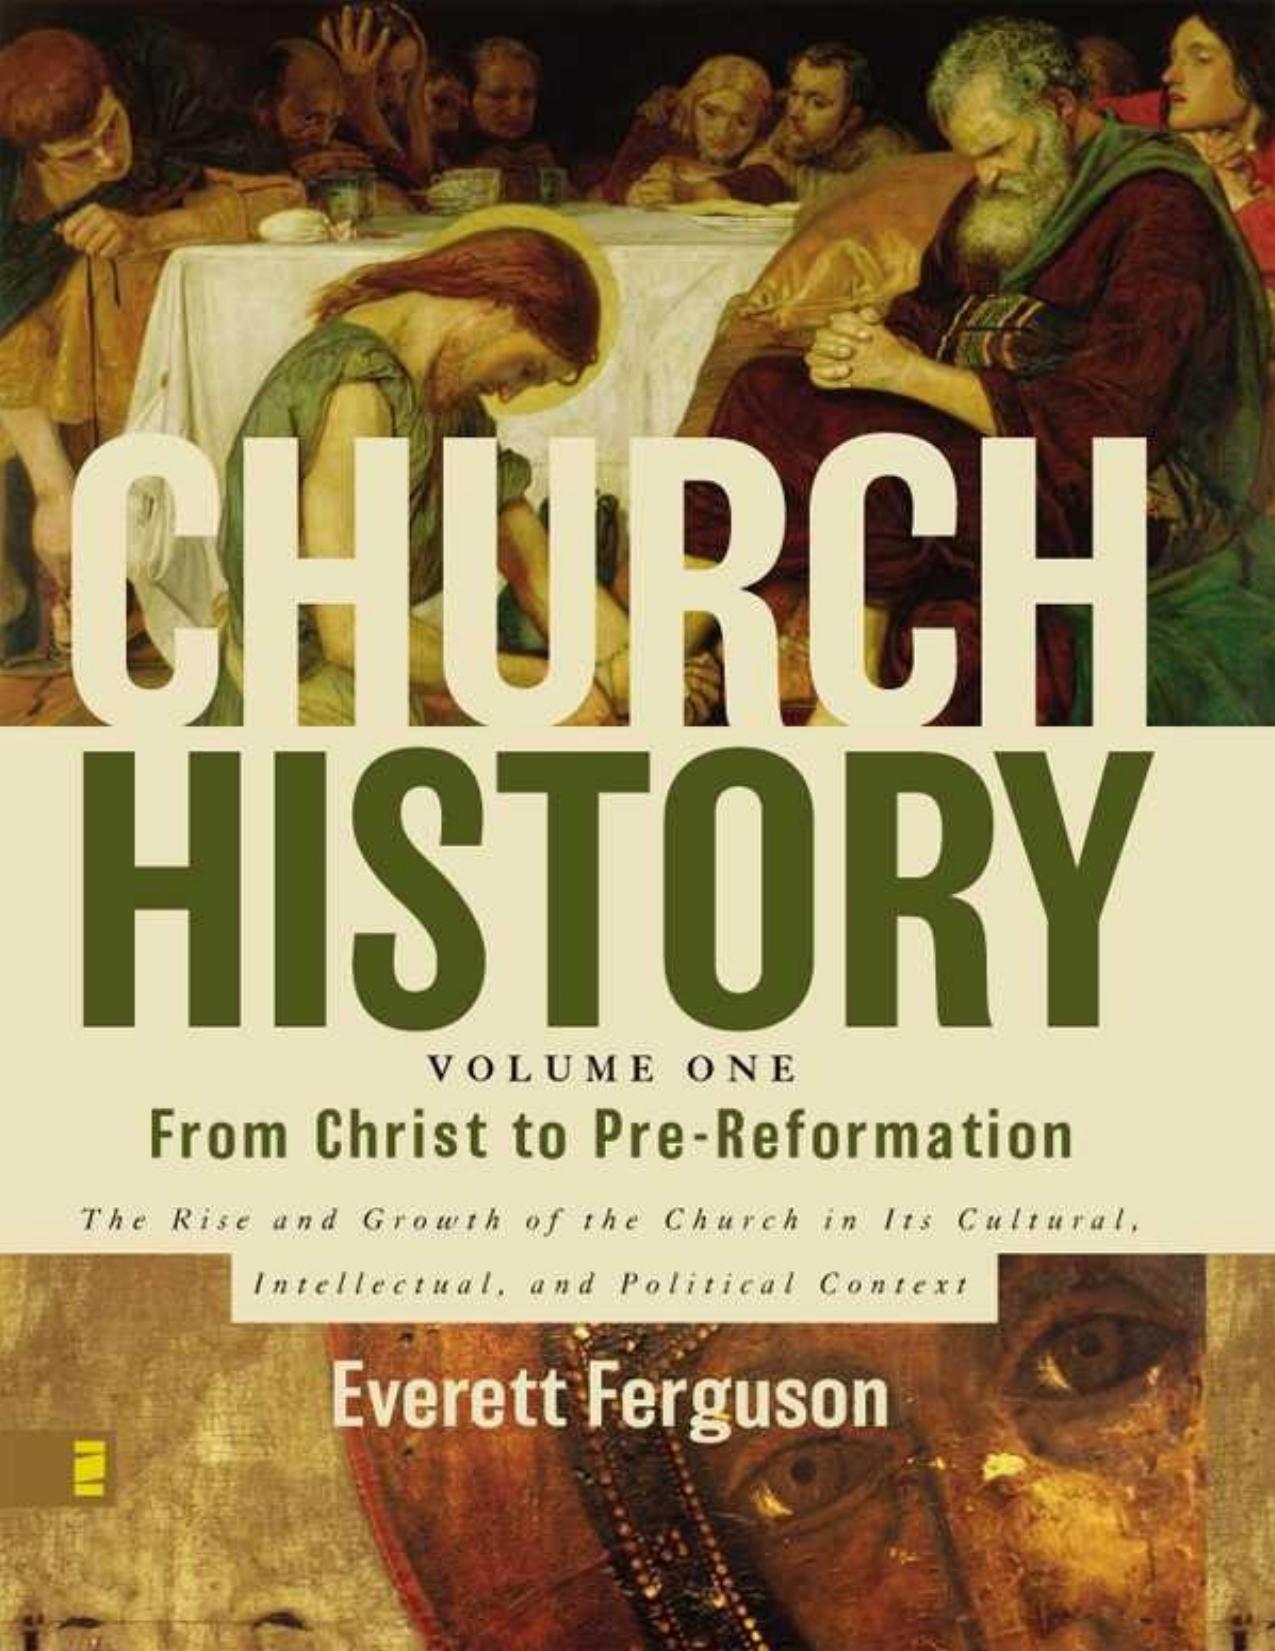 Church History, Vol. 1 - From Christ to Pre-Reformation - PDFDrive.com